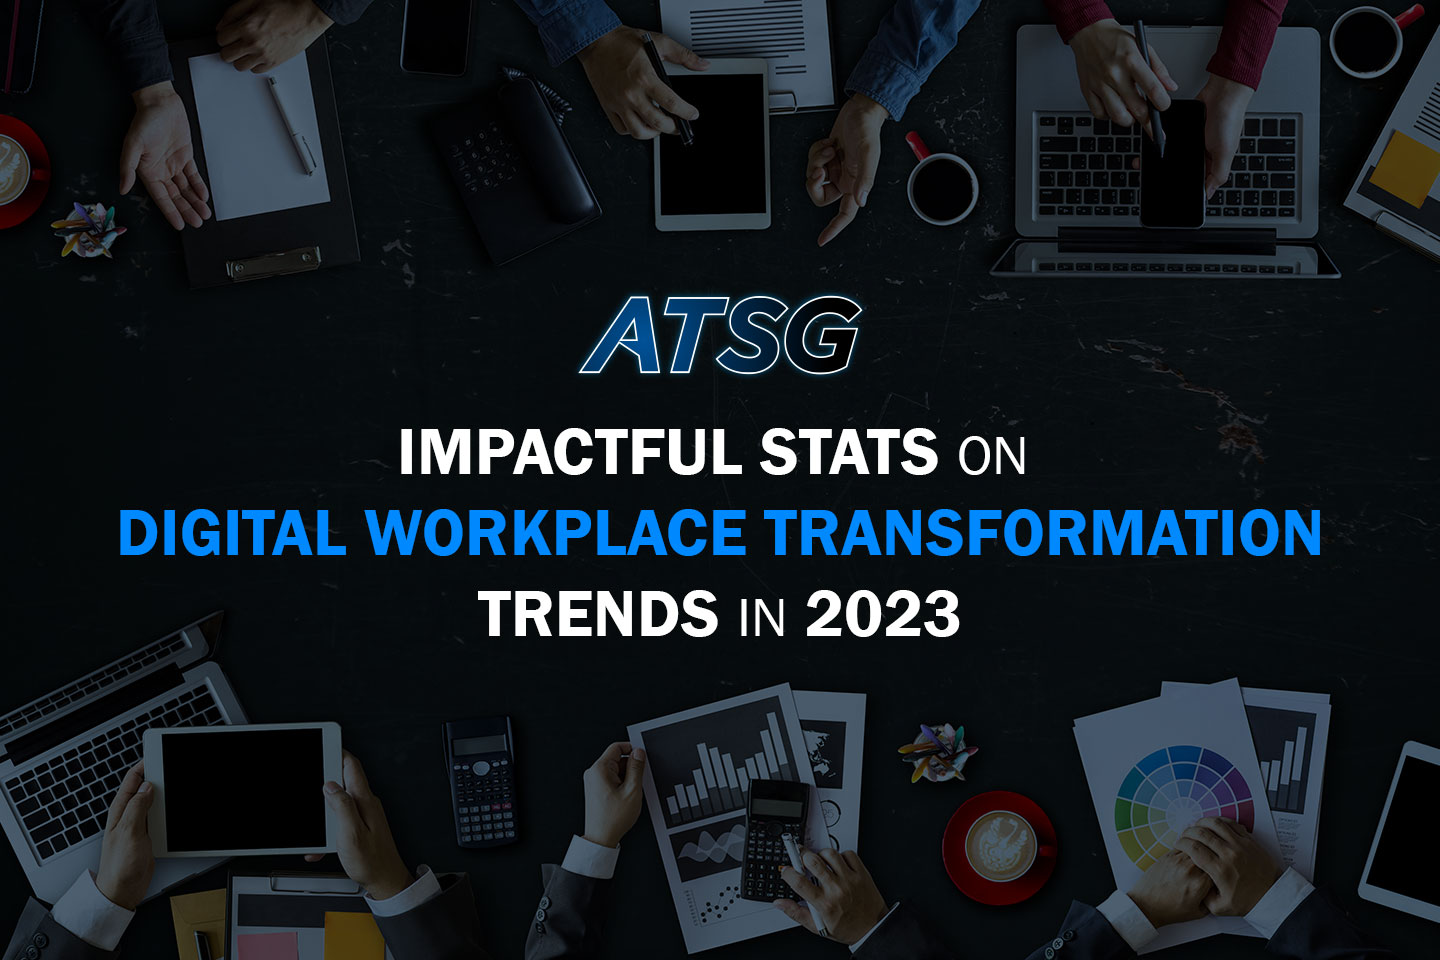 Impactful-Stats-on-Digital-Workplace-Transformation-Trends-in-2023-Featured